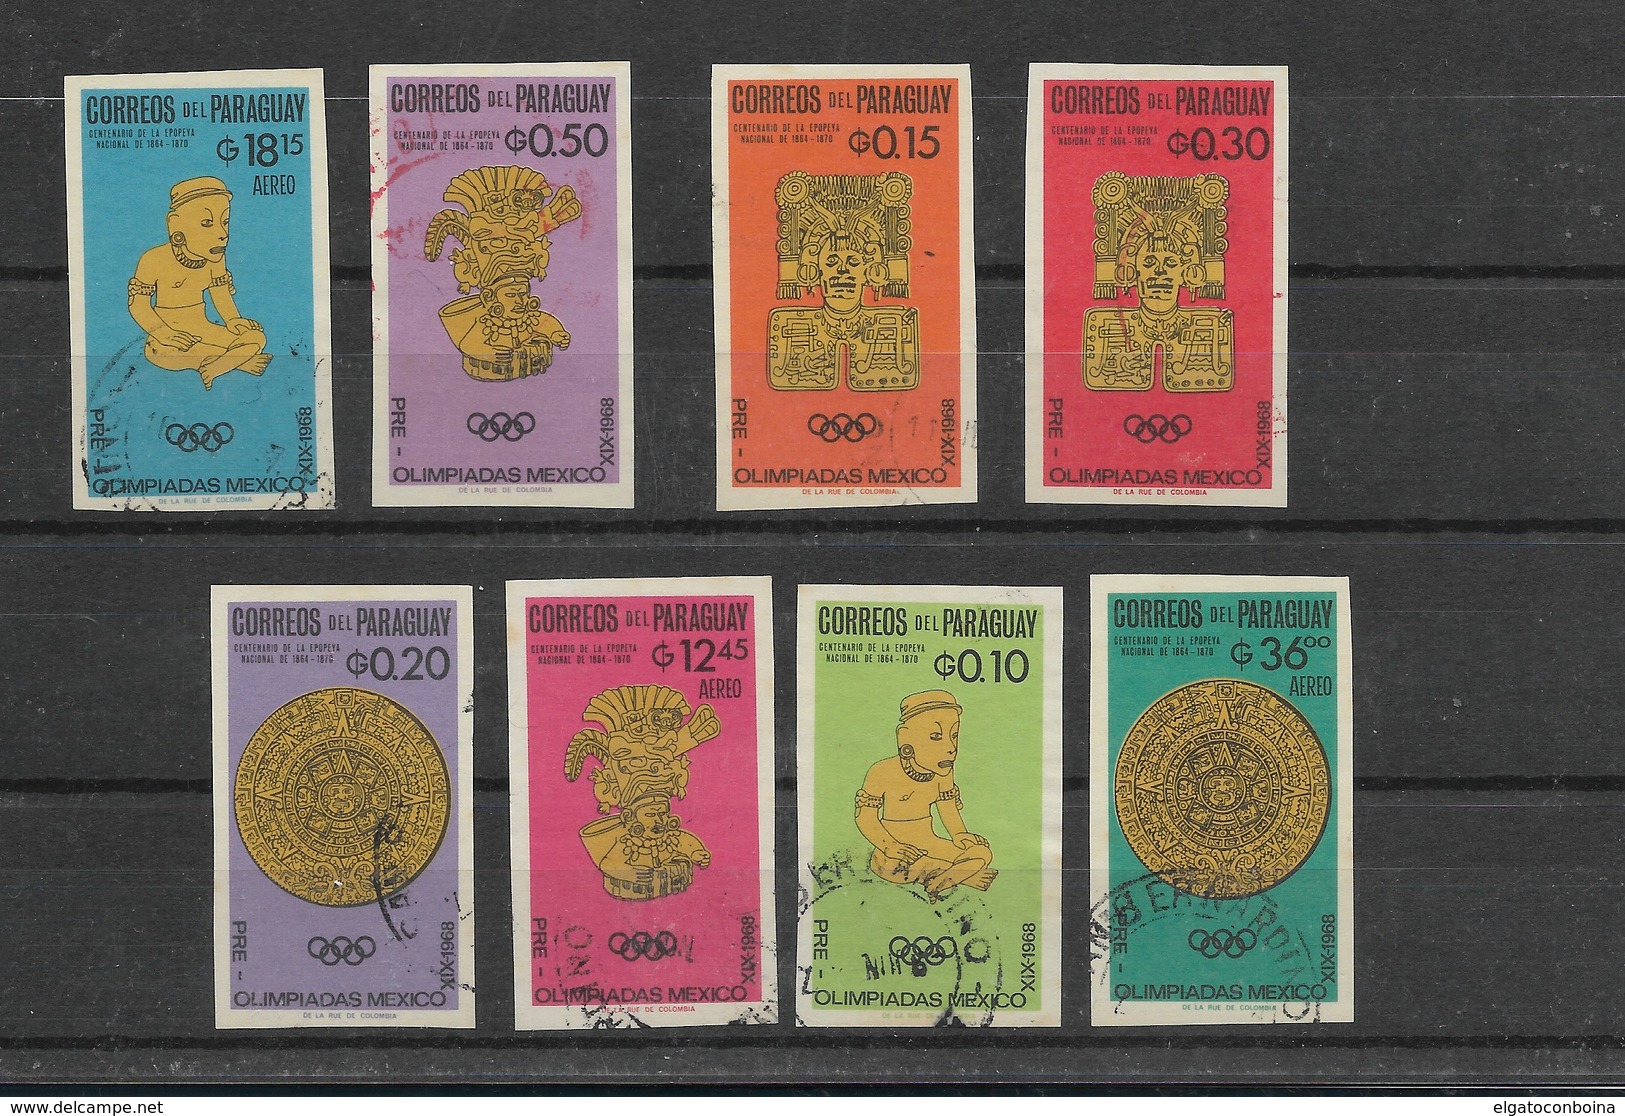 PARAGUAY 1966, OLYMPIC GAMES MEXICO 1966, ARCHEOLOGY, GOLD SCULPTURES. 8 VALUES CPL SET IMPERFORATED USED - Paraguay